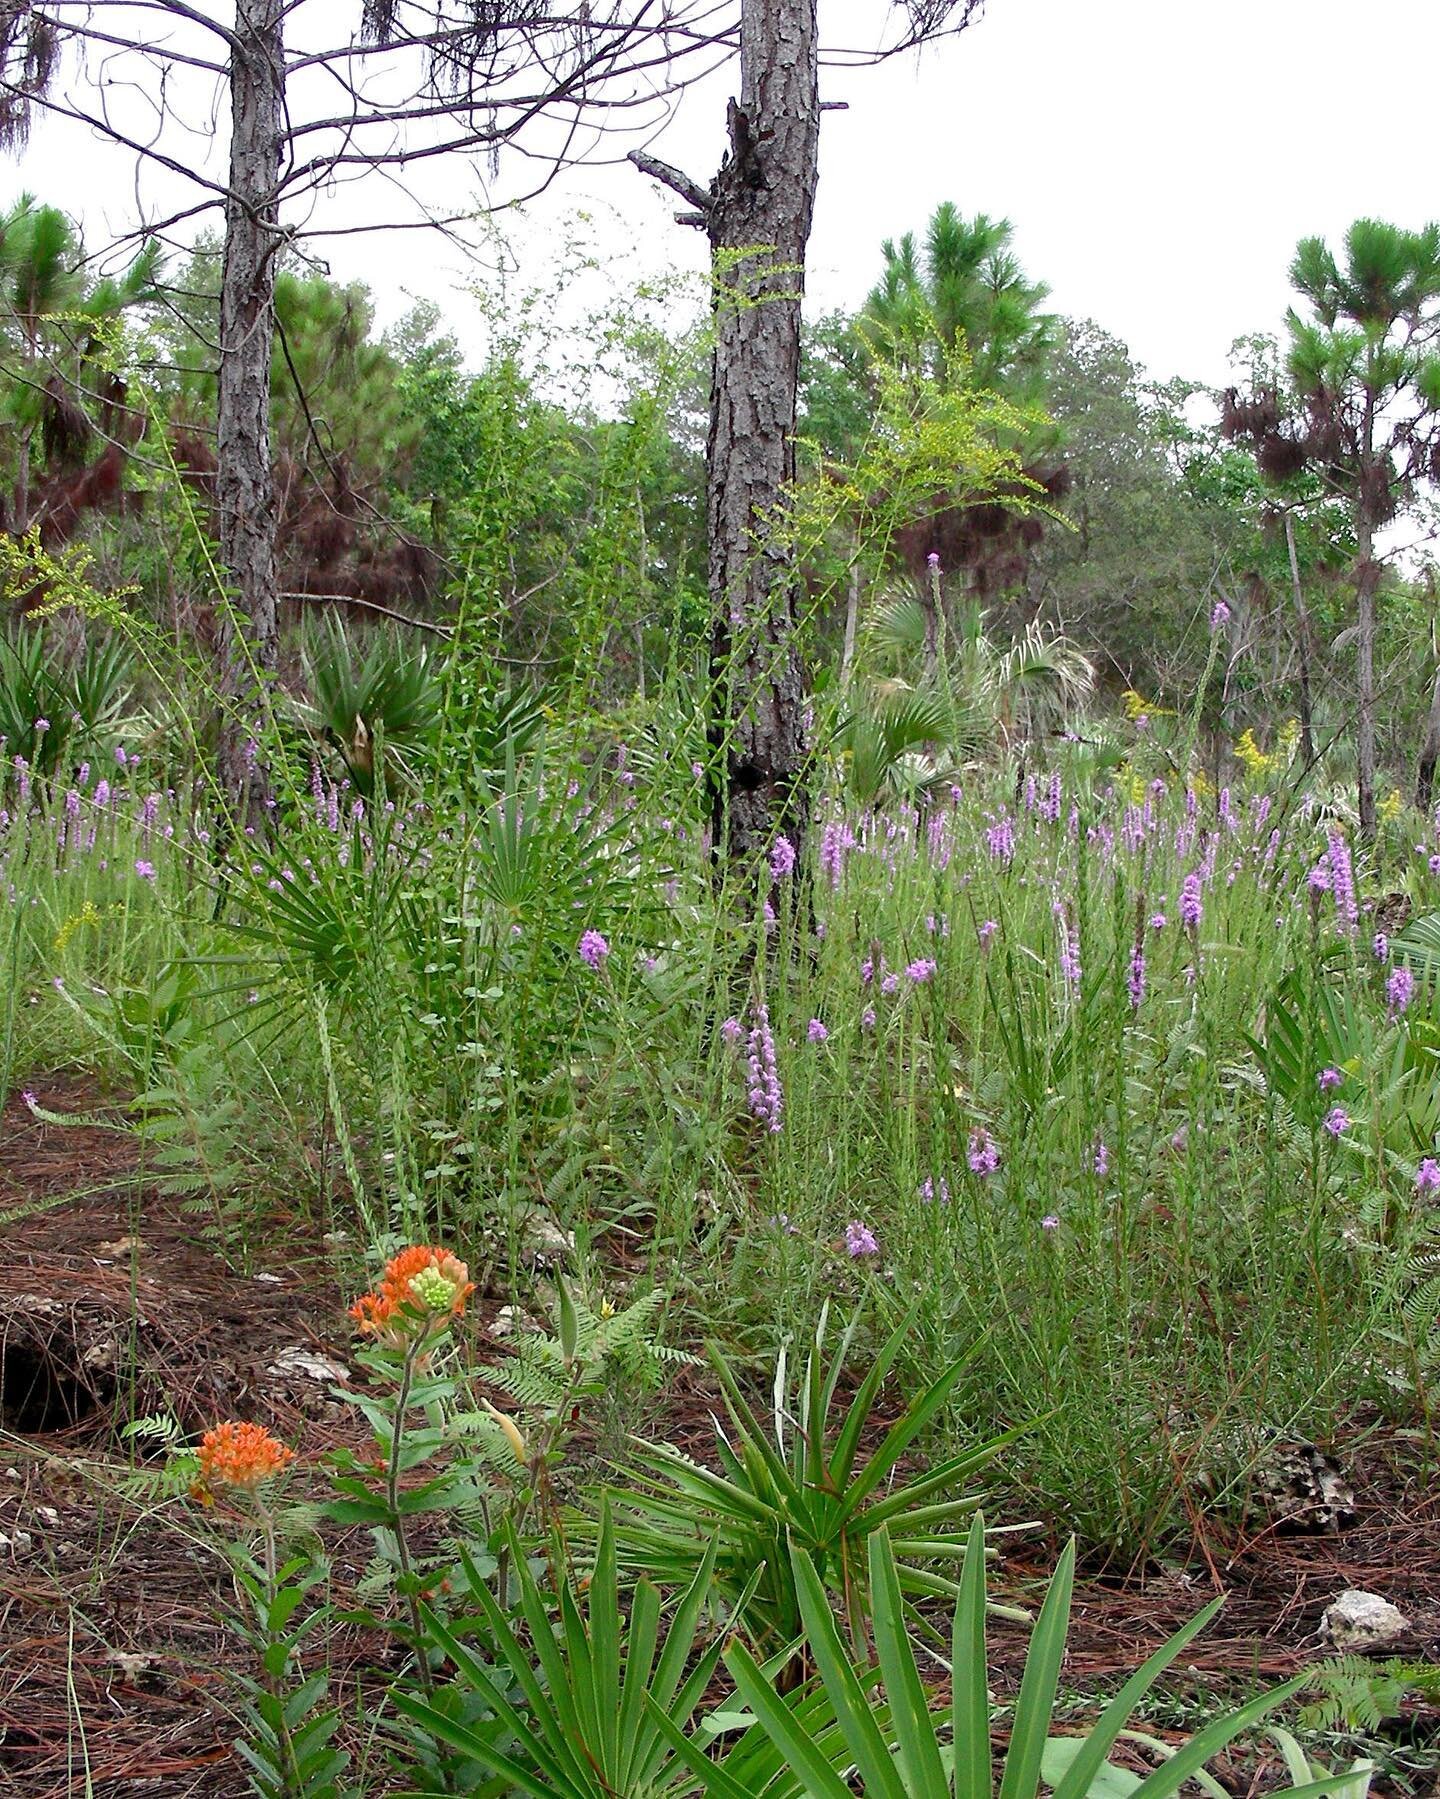 In the US, pine rockland ecosystems are found only in the southernmost part of FL, and 80% of these ecosystems are vulnerable to climate-driven sea-level rise. 

Our 2020 grant partner, @nababutterfly is restoring connectivity between pine rockland p